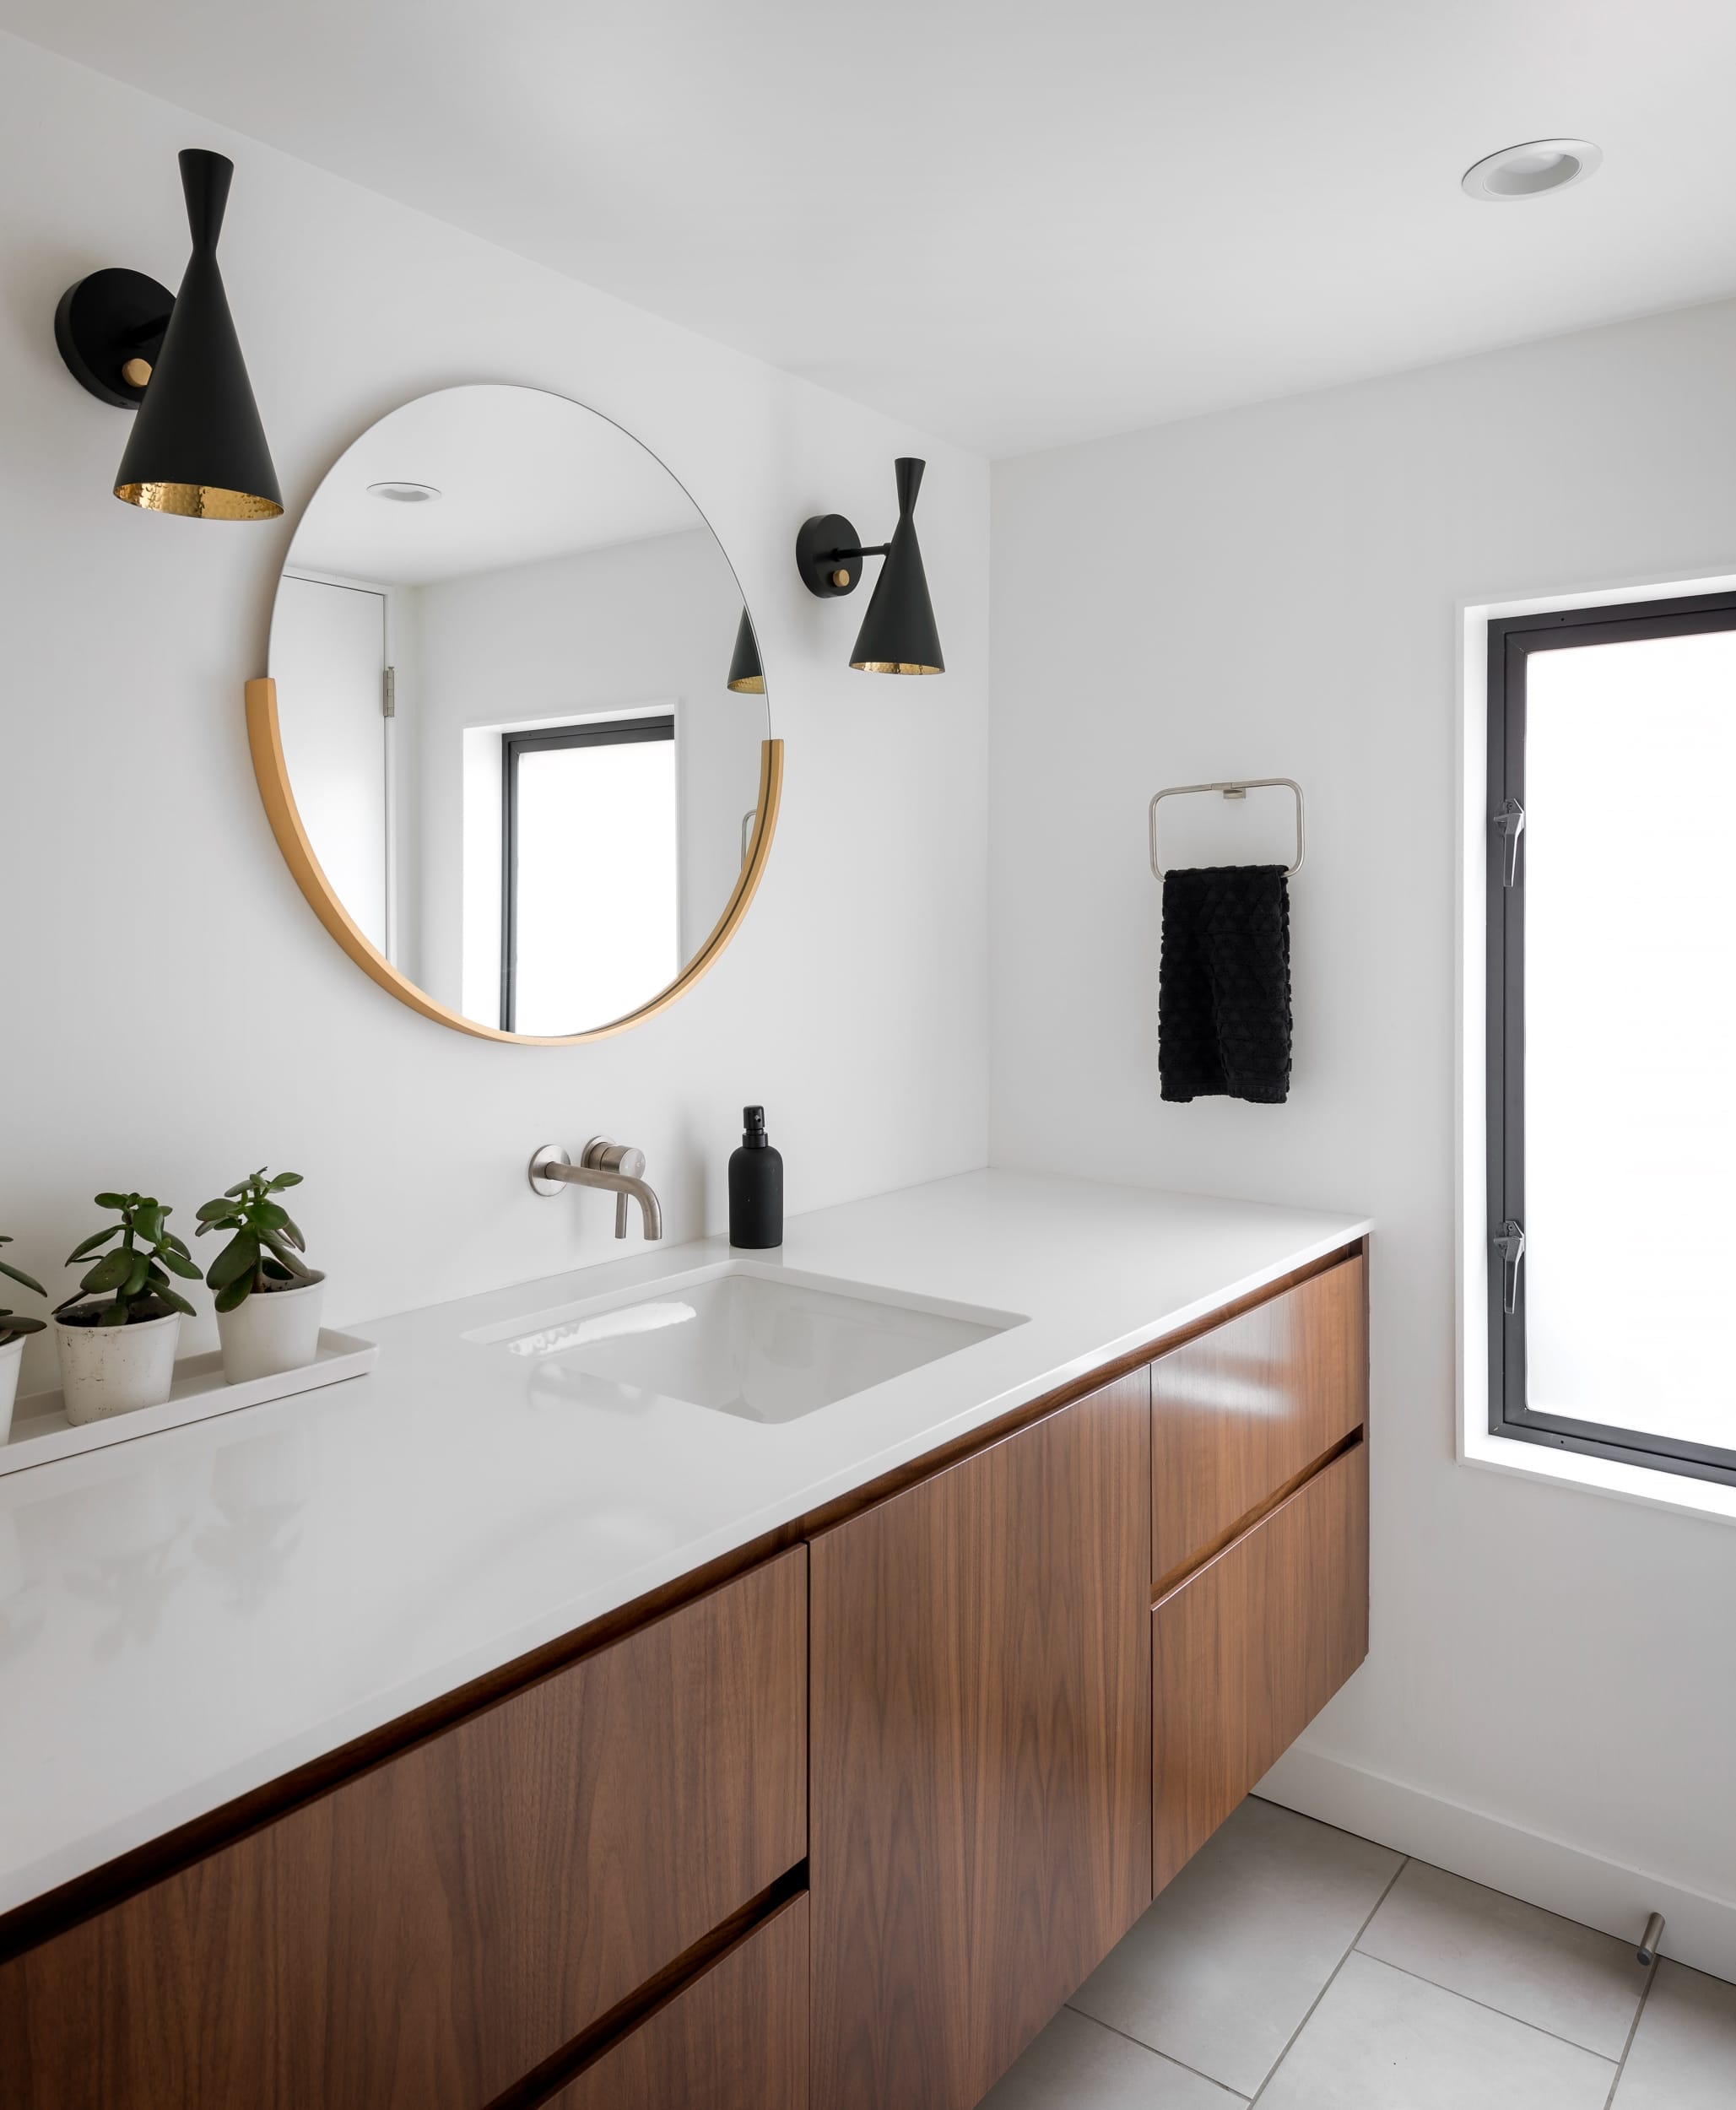 A modern bathroom with wooden cabinets and a round mirror.